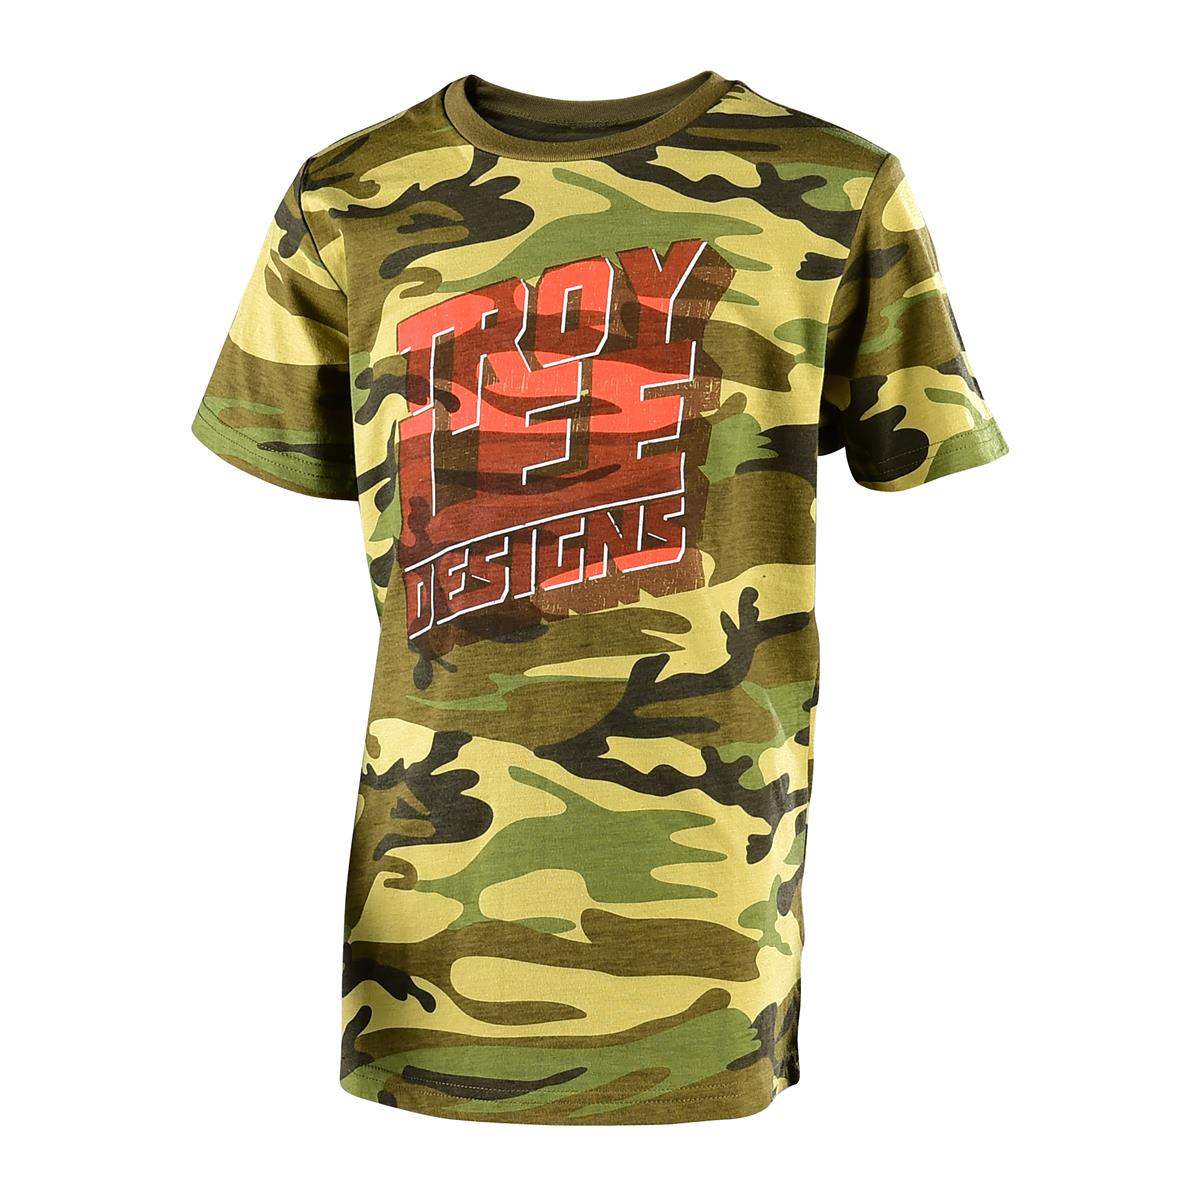 Troy Lee Designs Kids T-Shirt Block Party Camo Army Green